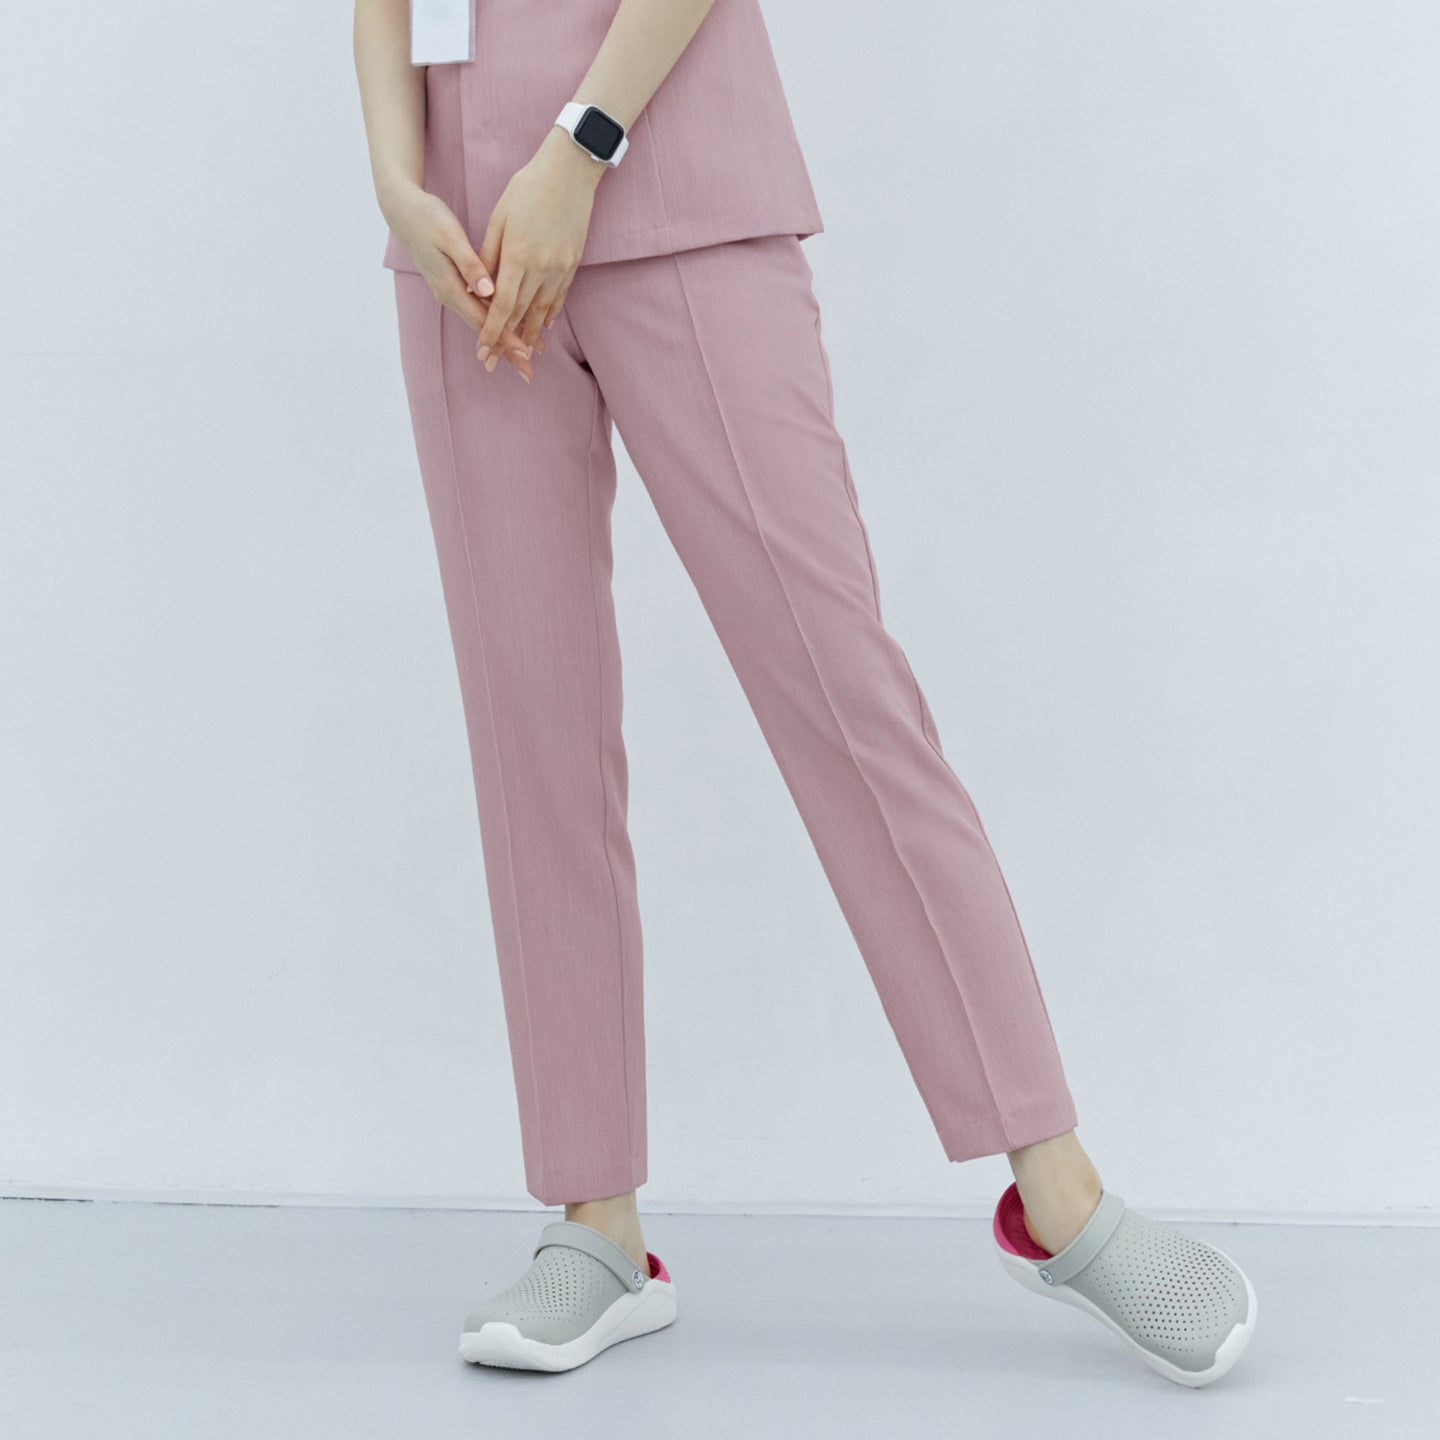 Soft Pink Line Banding Scrub Pants, half-side view, highlighting the clean lines and comfortable fit, paired with gray shoes,Soft Pink